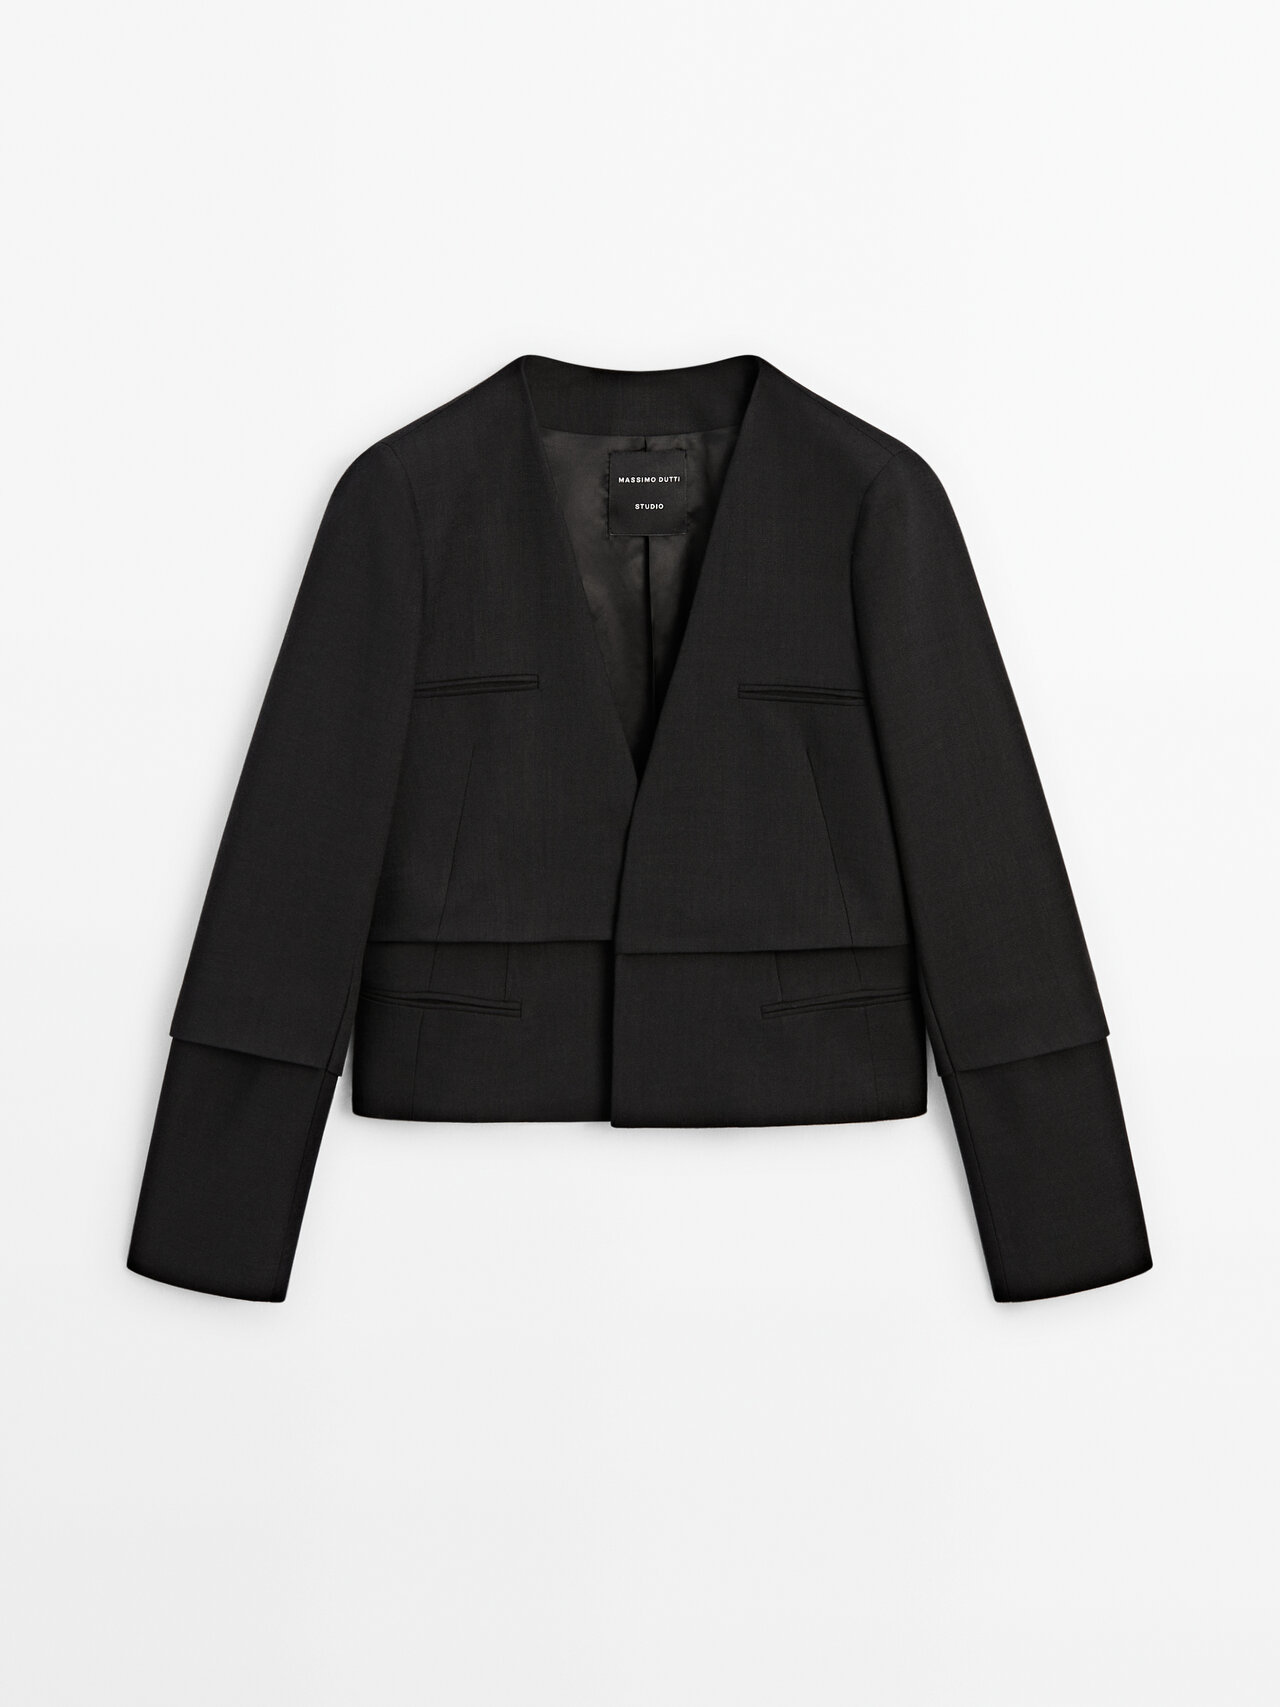 Massimo Dutti Jacket With Double Pocket Detail In Black